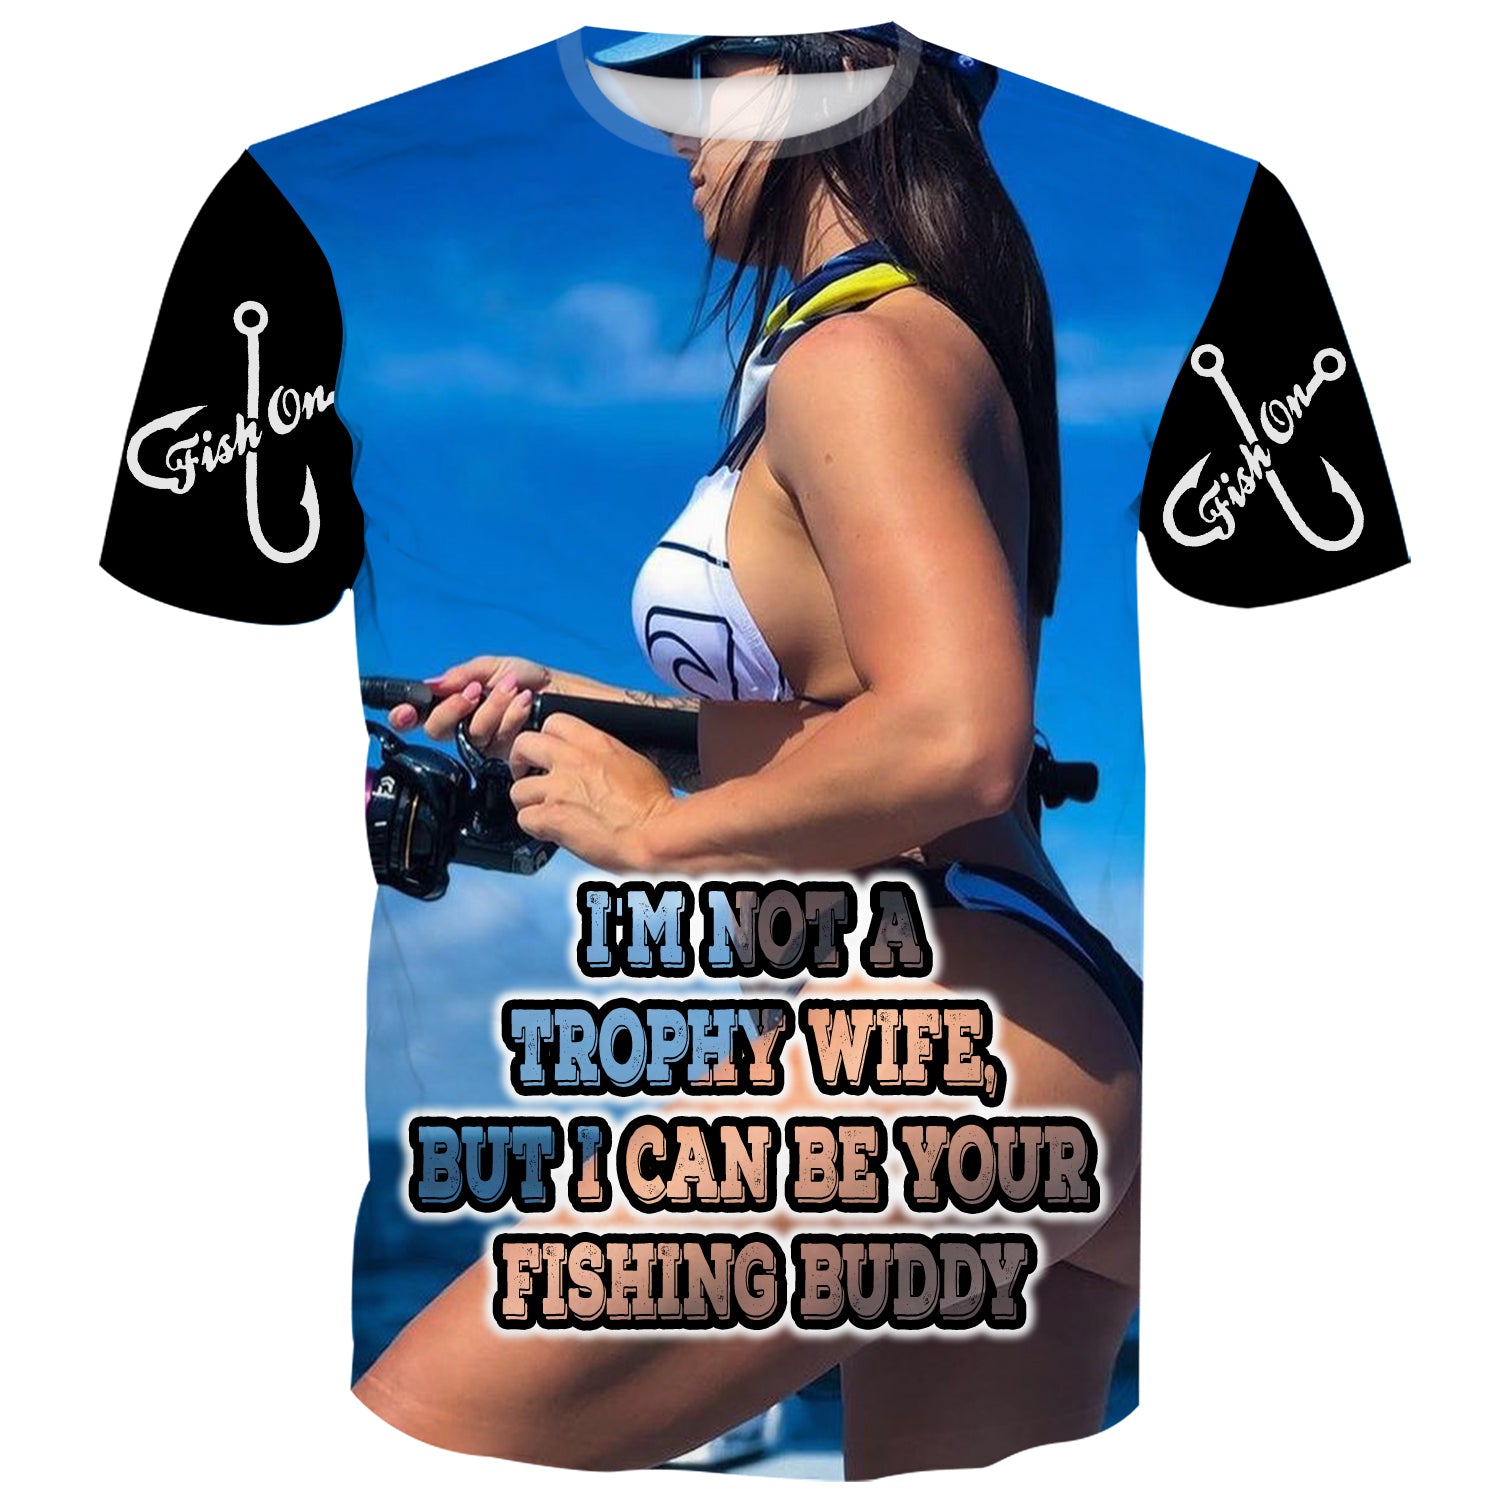 Confident woman in a blue bikini stands in clear water, holding a fishing rod with a joyful smile. She wears a shirt that reads 'I'M NOT A TROPHY WIFE BUT I CAN BE YOUR FISHING BUDDY.' Blue sky and white clouds create a cheerful background